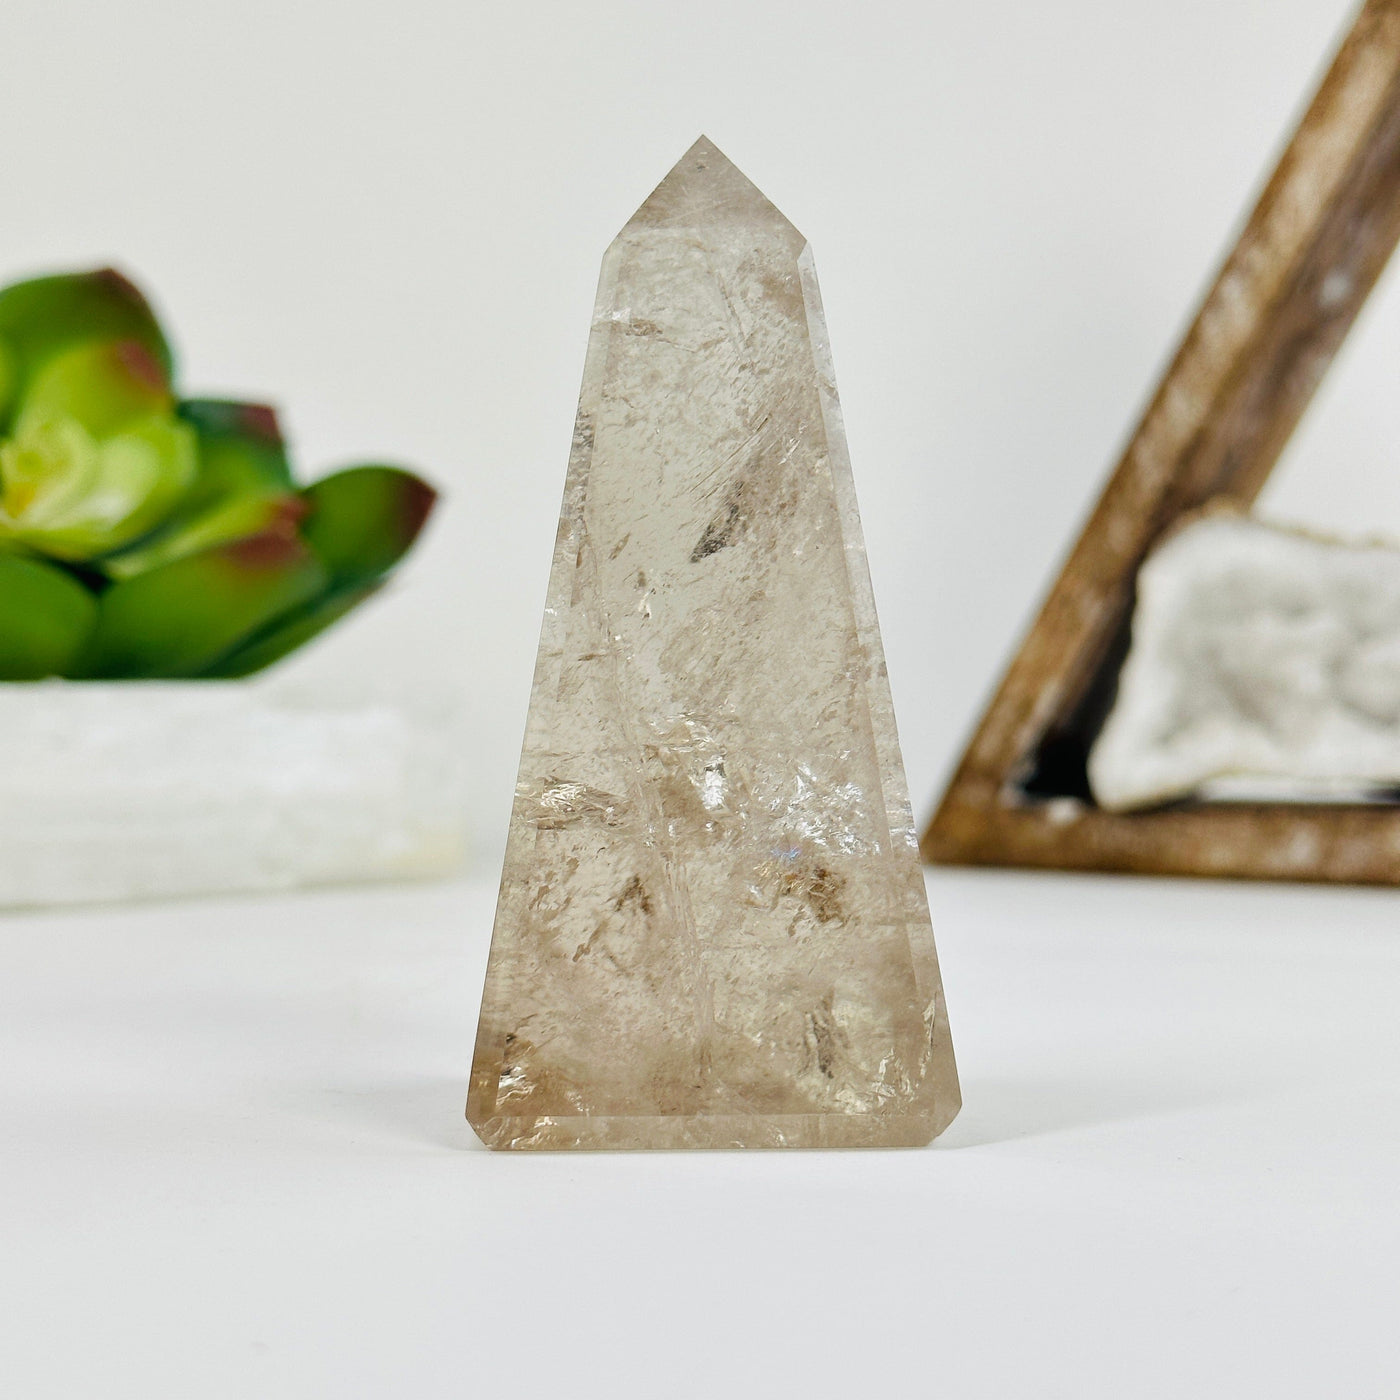 Smokey Quartz obelisk with decorations in the background